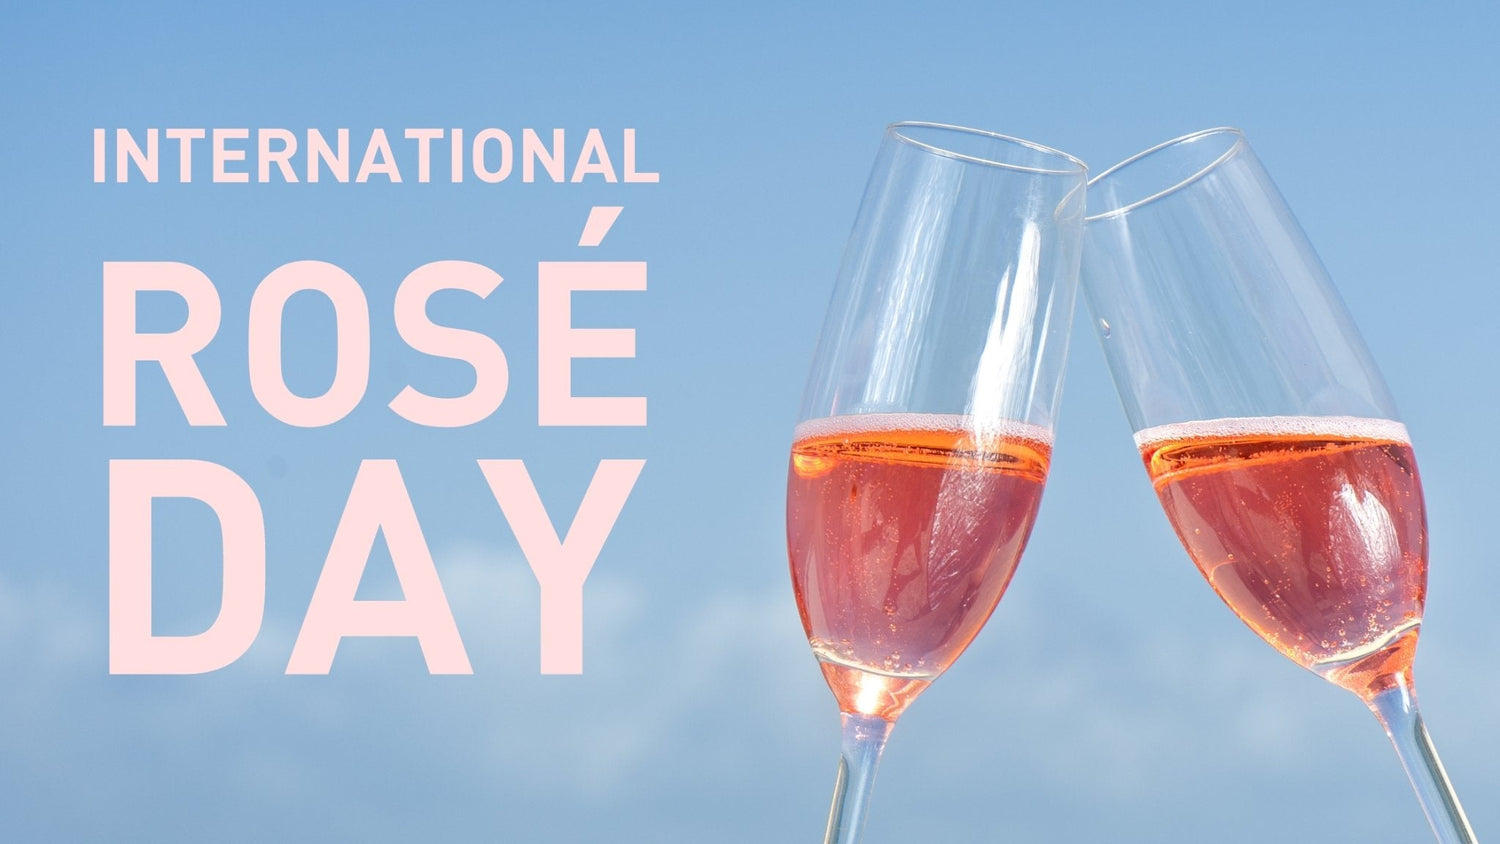 Happy International Rosé Day! Let's Stop and Smell the Rosés. - Millon Wines